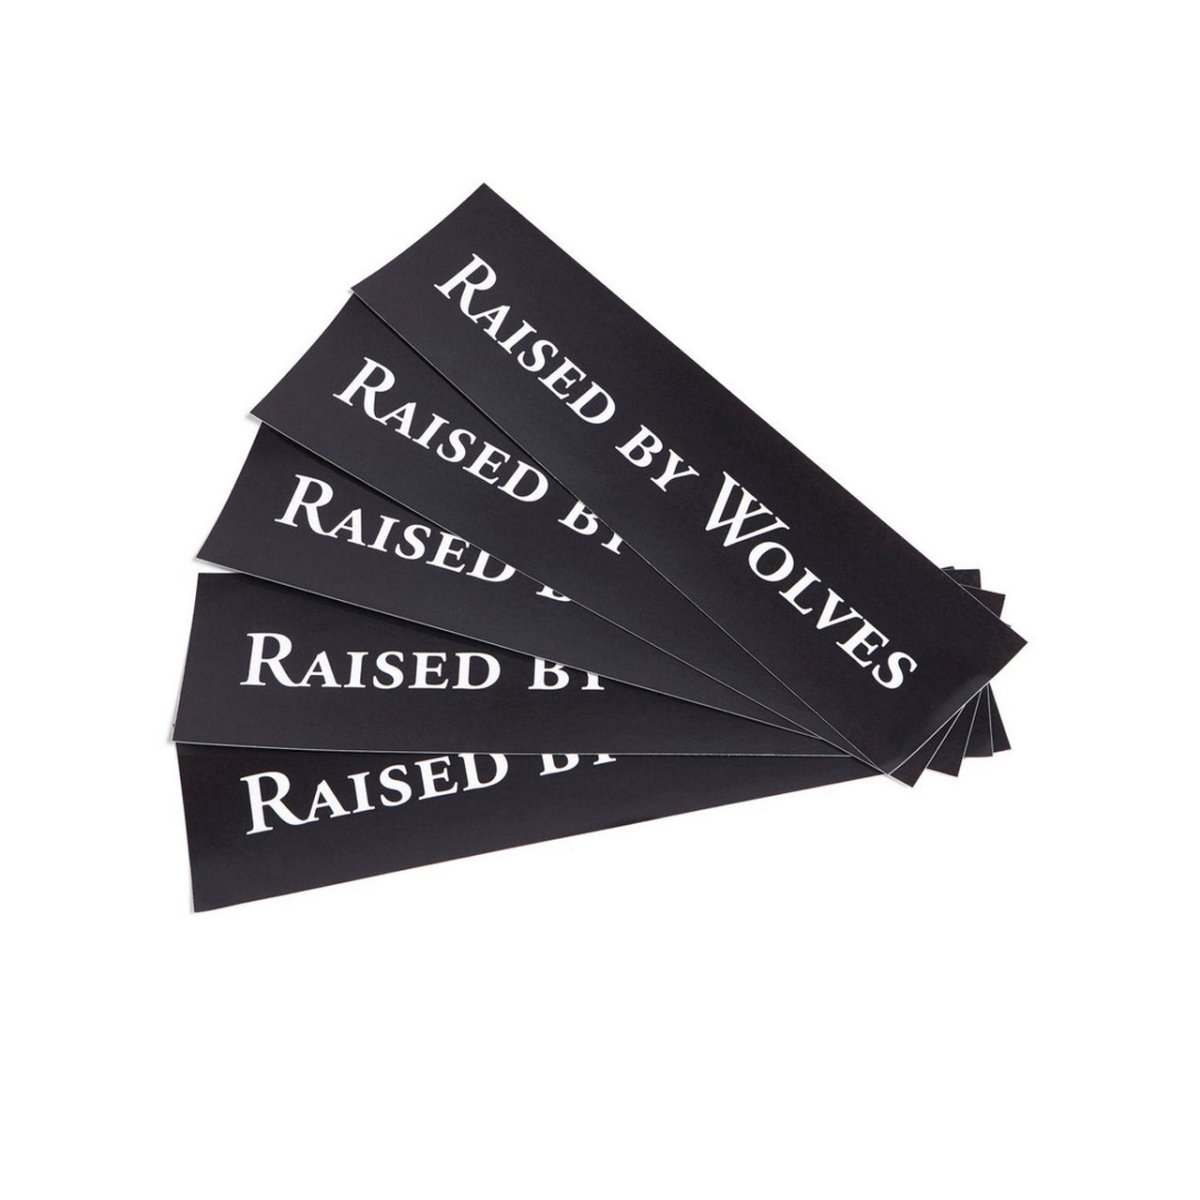 Raised by Wolves Logotype Stickers (5 Pack) (Schwarz)  - Allike Store